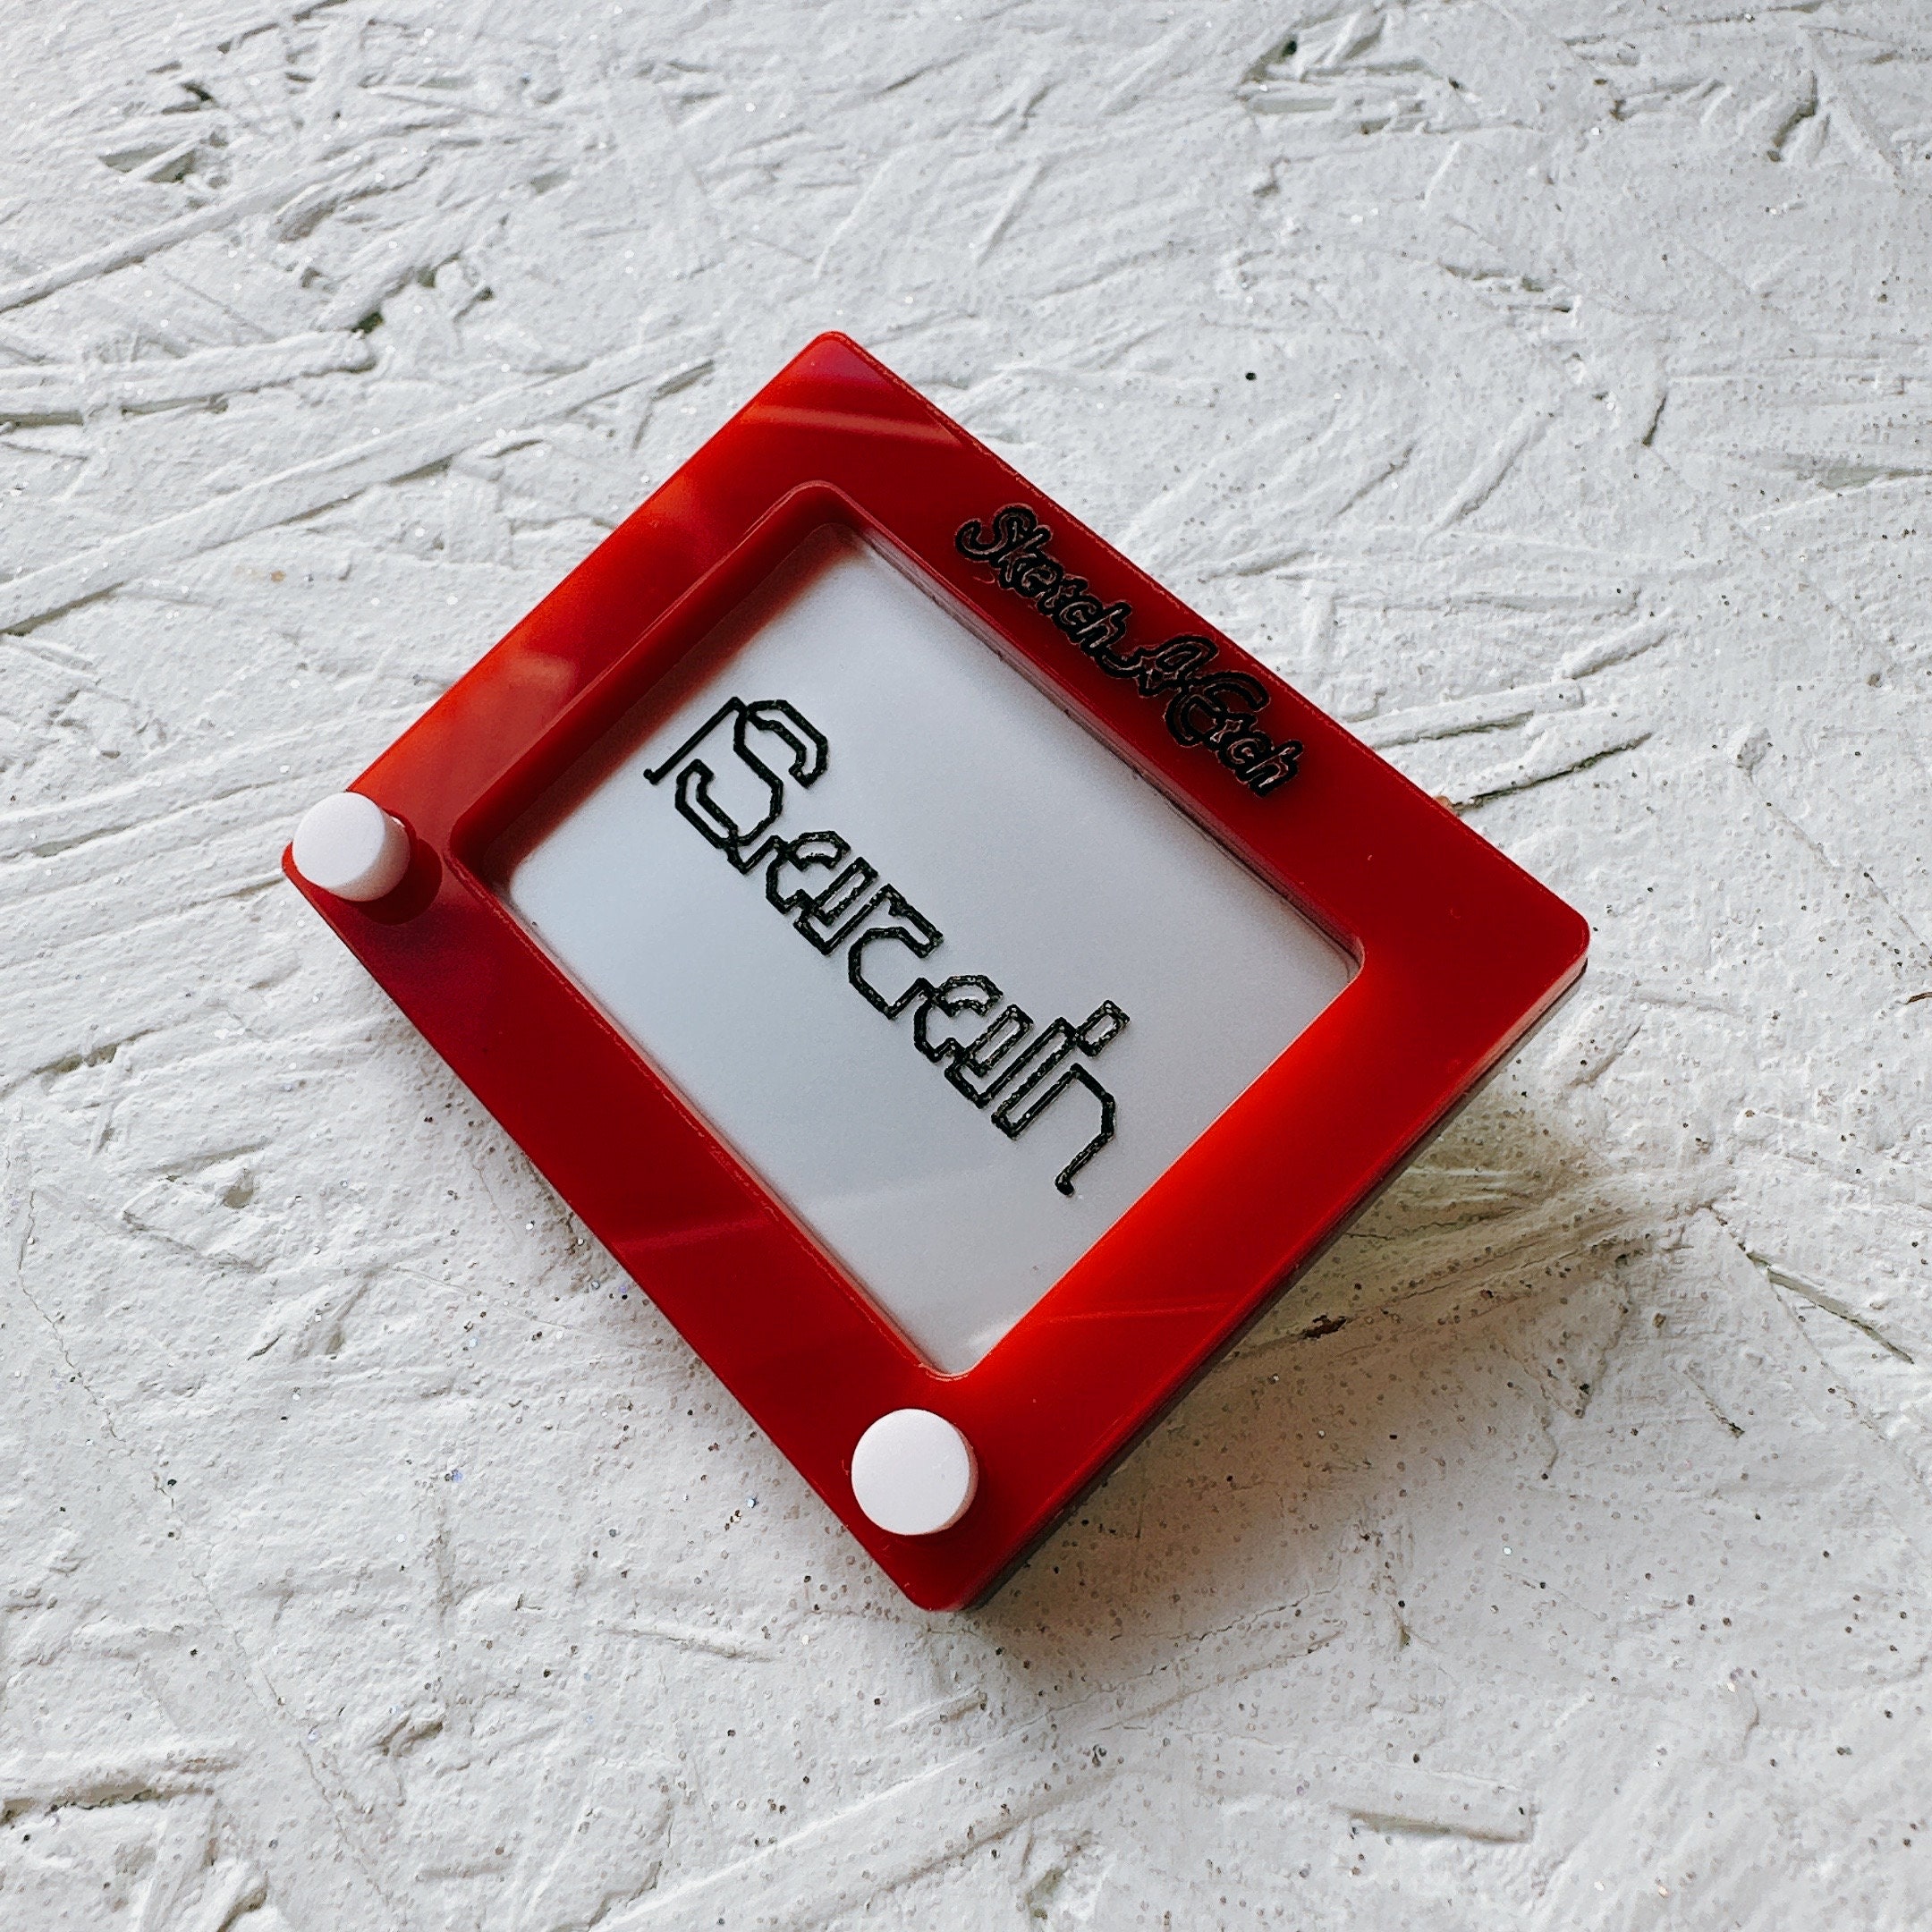 Buy Etch a Sketch Toy Online In India  Etsy India